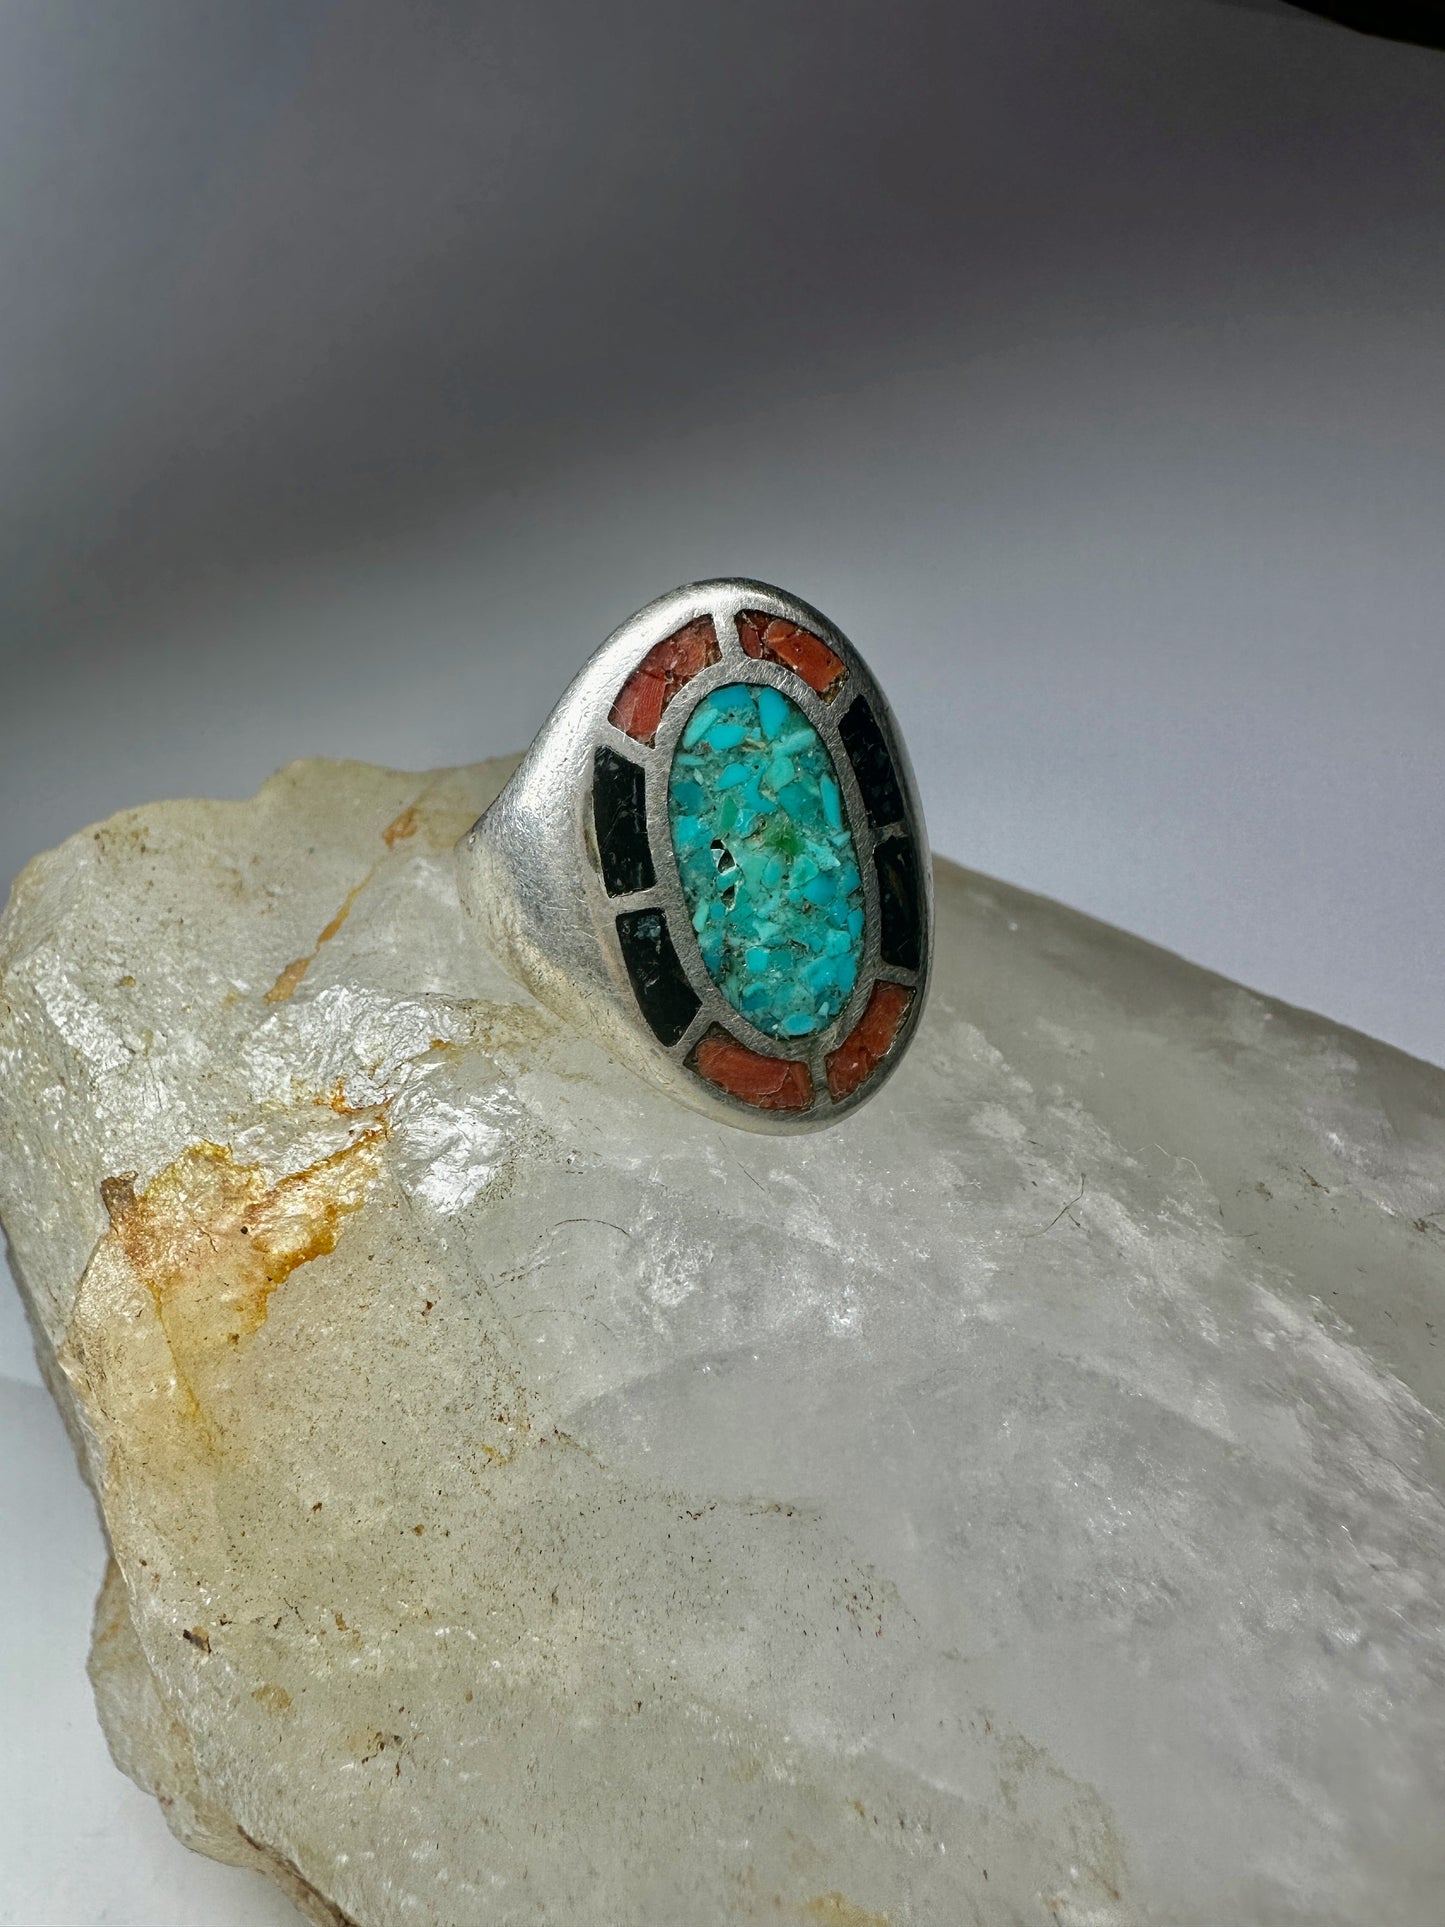 Navajo ring turquoise coral chips onyx band size 12.75 sterling silver women men